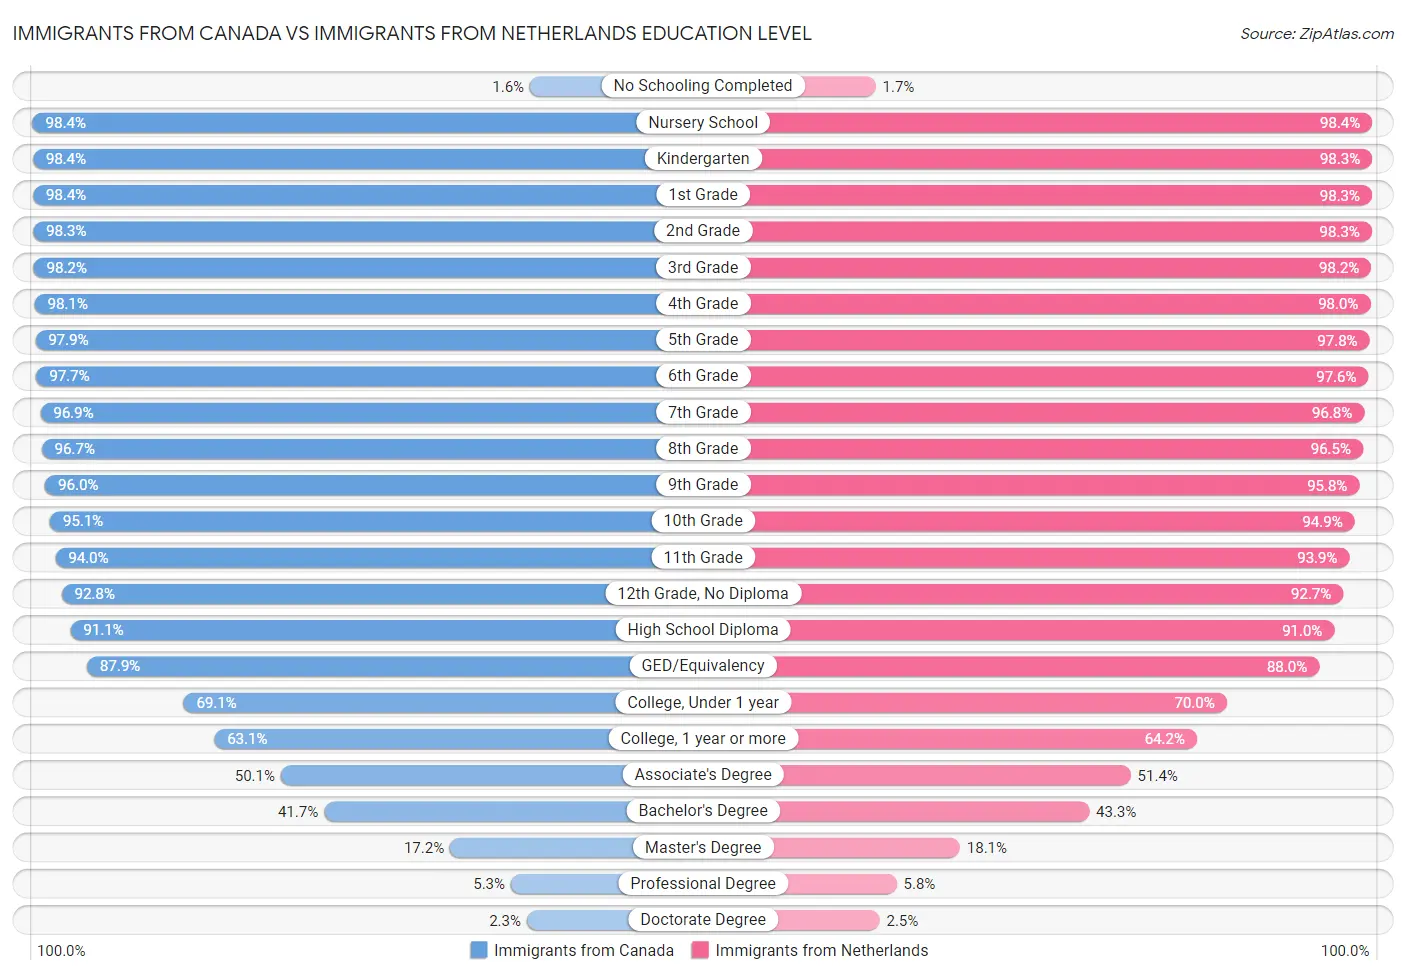 Immigrants from Canada vs Immigrants from Netherlands Education Level